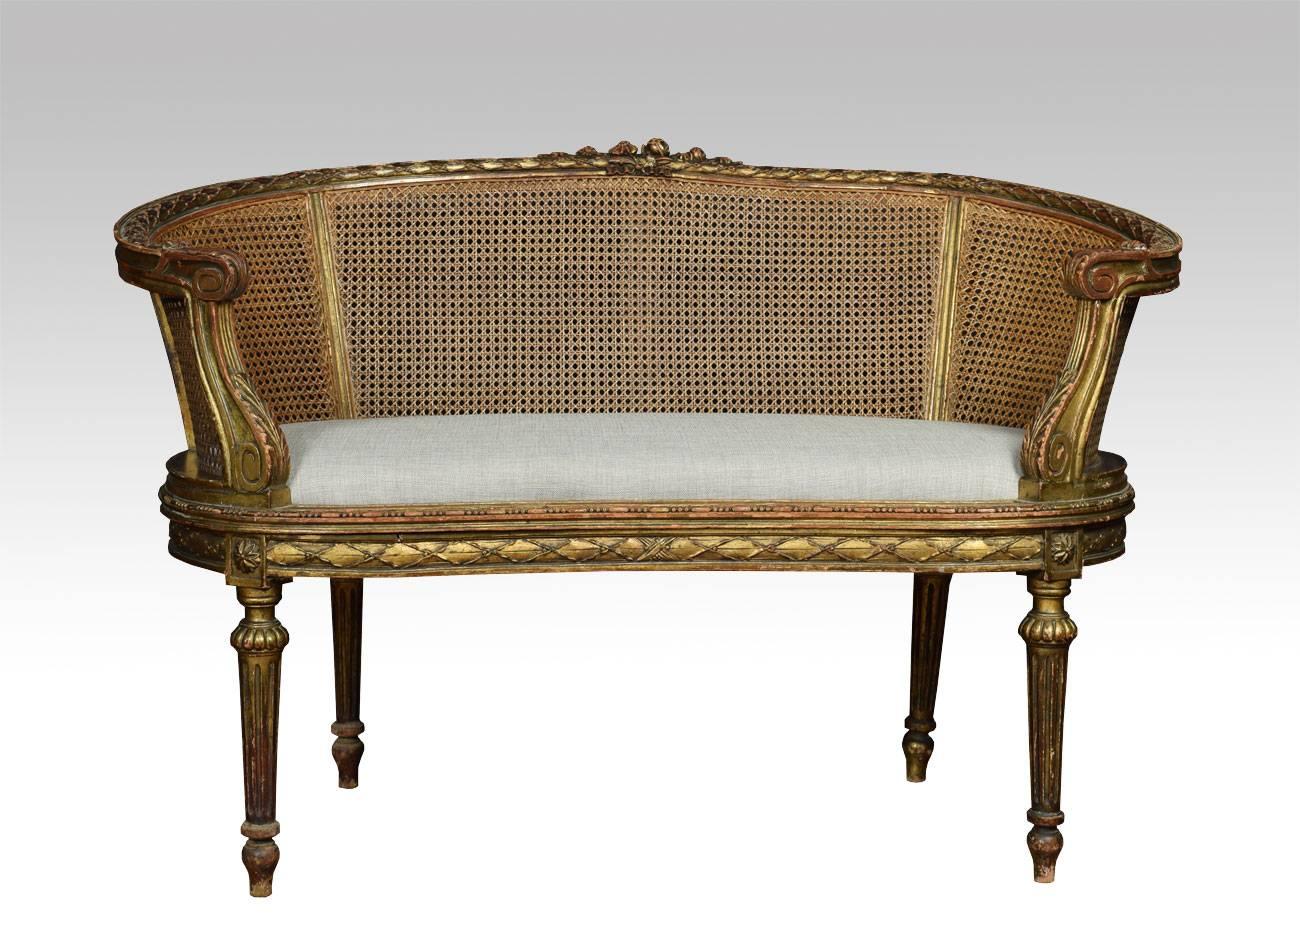 French Louis XVI style canapé settee, the carved rail in the typical manner of the period with highly detailed ribbon work along the crest among foliage, the frame a repeating motif of detailed leaves. To the scrolling acanthus caped arms, flanking